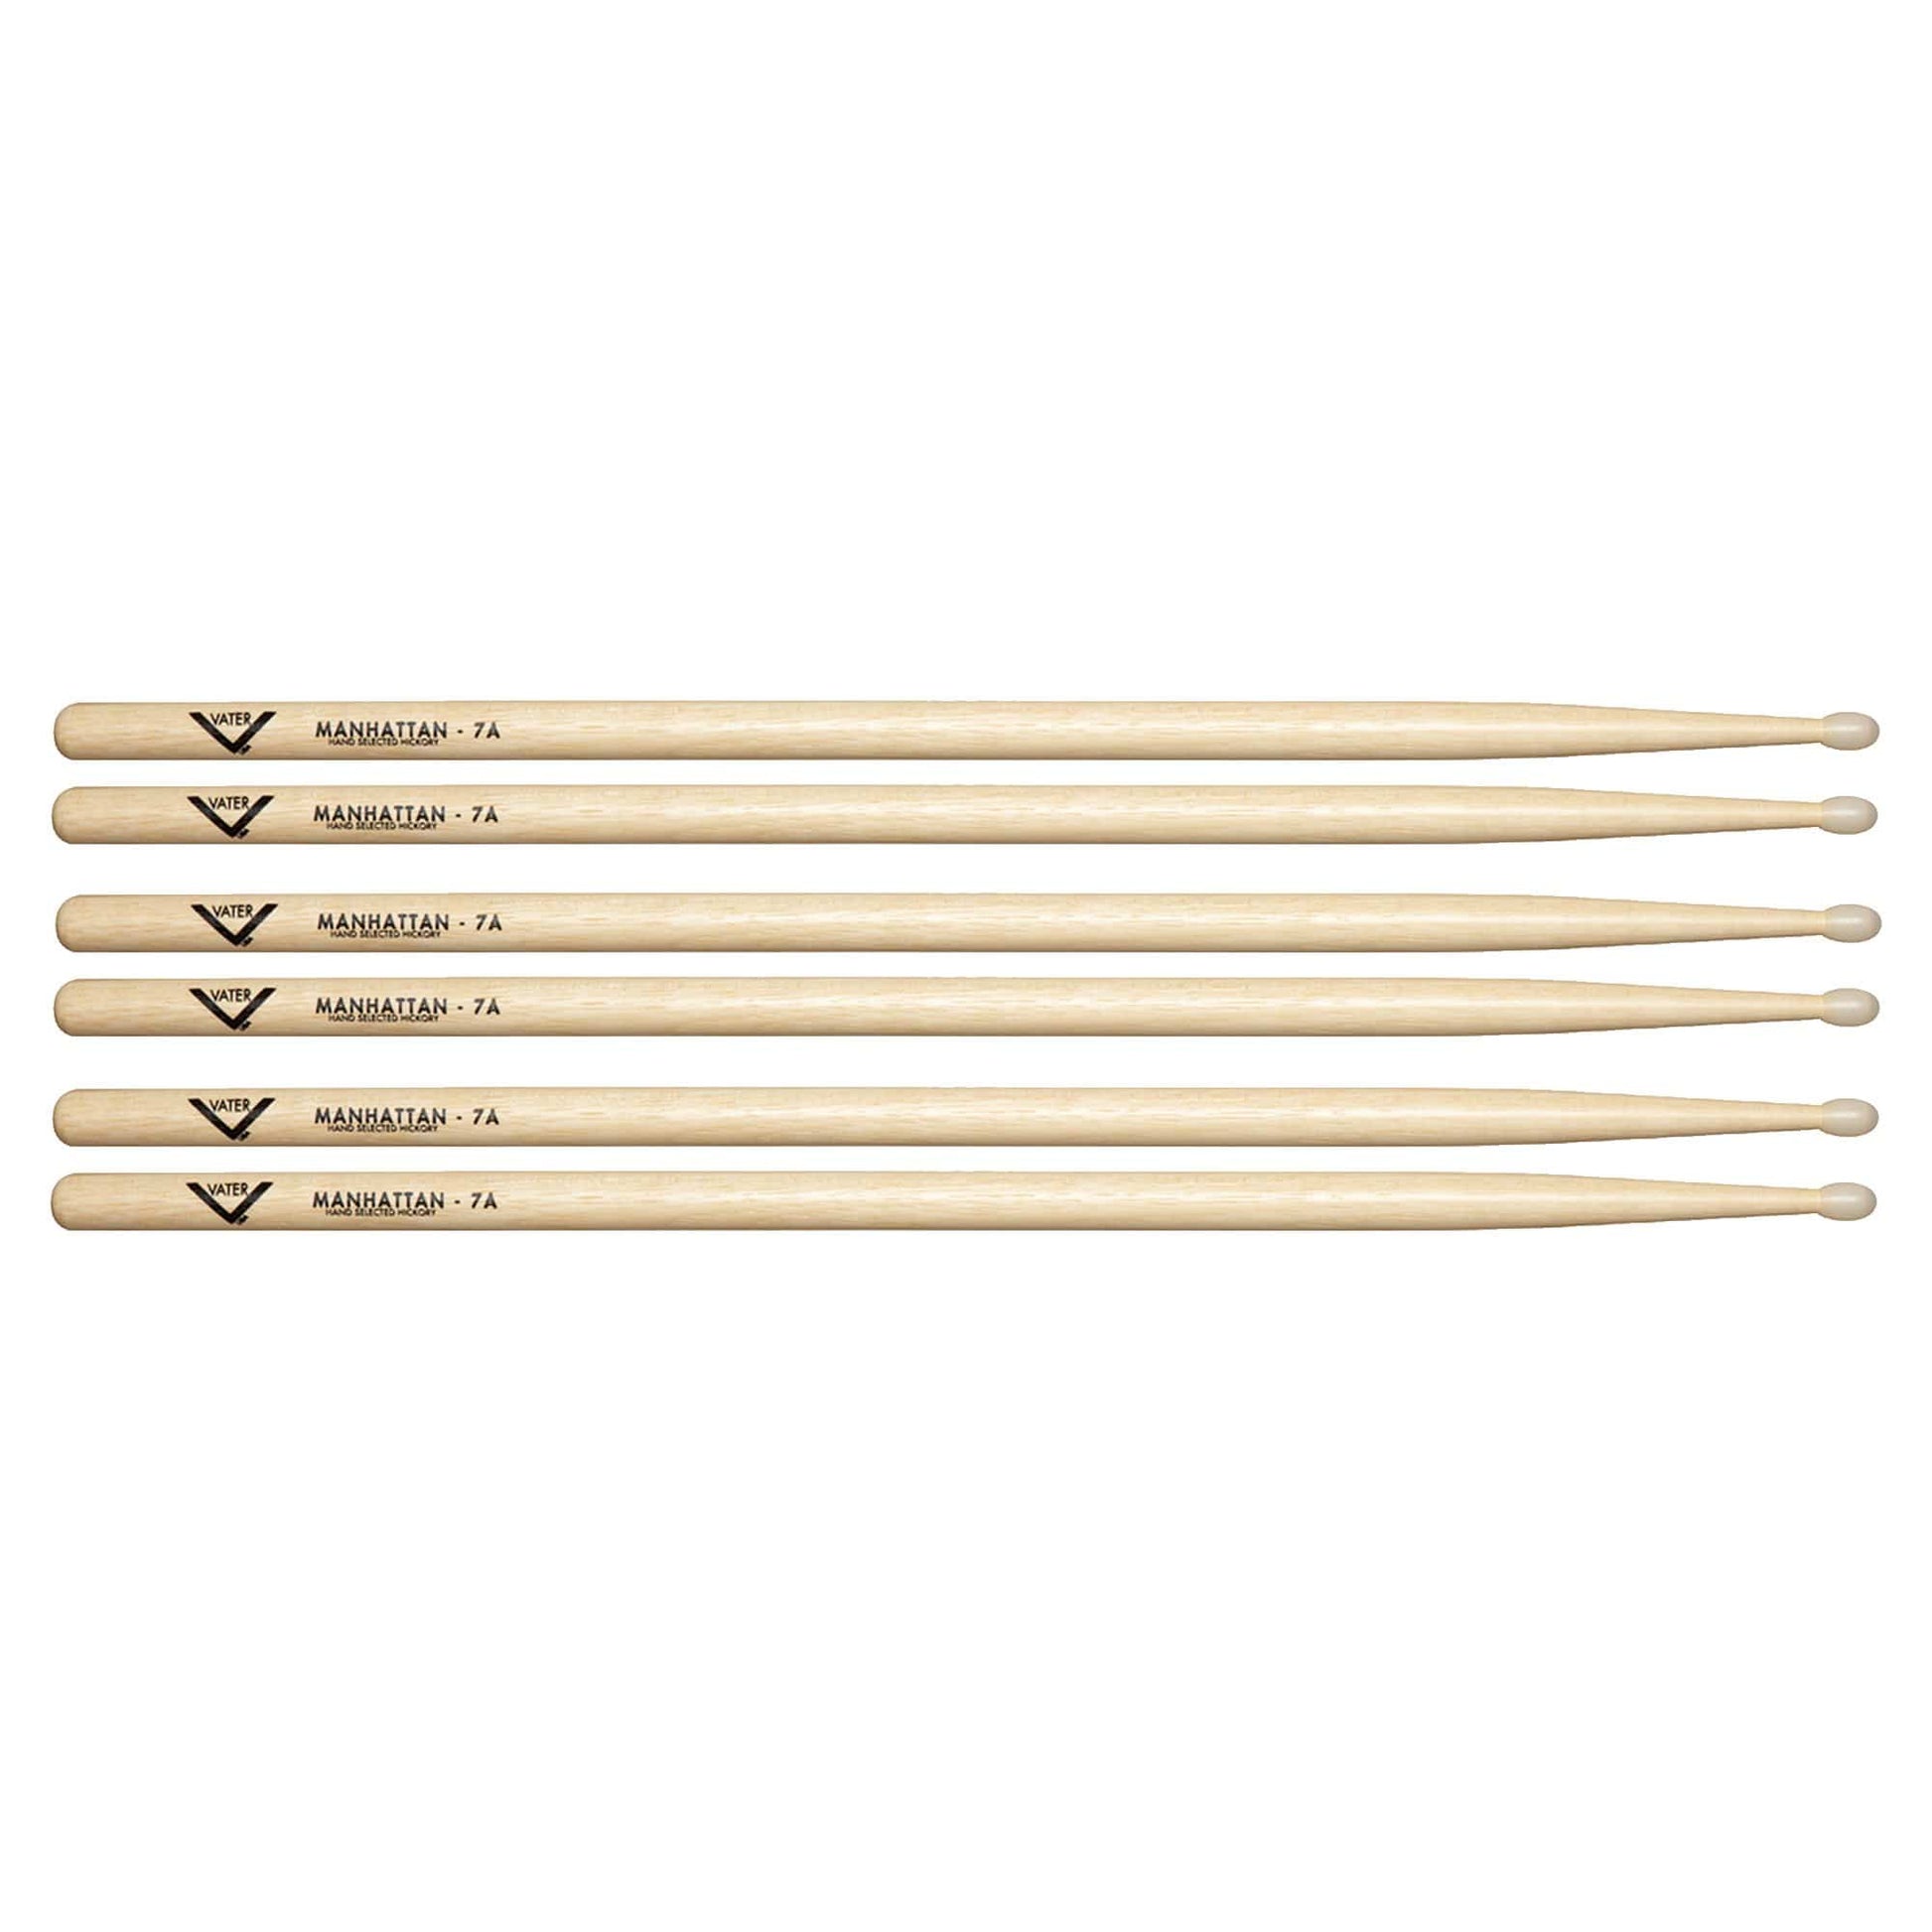 Vater Hickory Manhattan 7A Nylon Tip Drum Sticks (3 Pair Bundle) Drums and Percussion / Parts and Accessories / Drum Sticks and Mallets